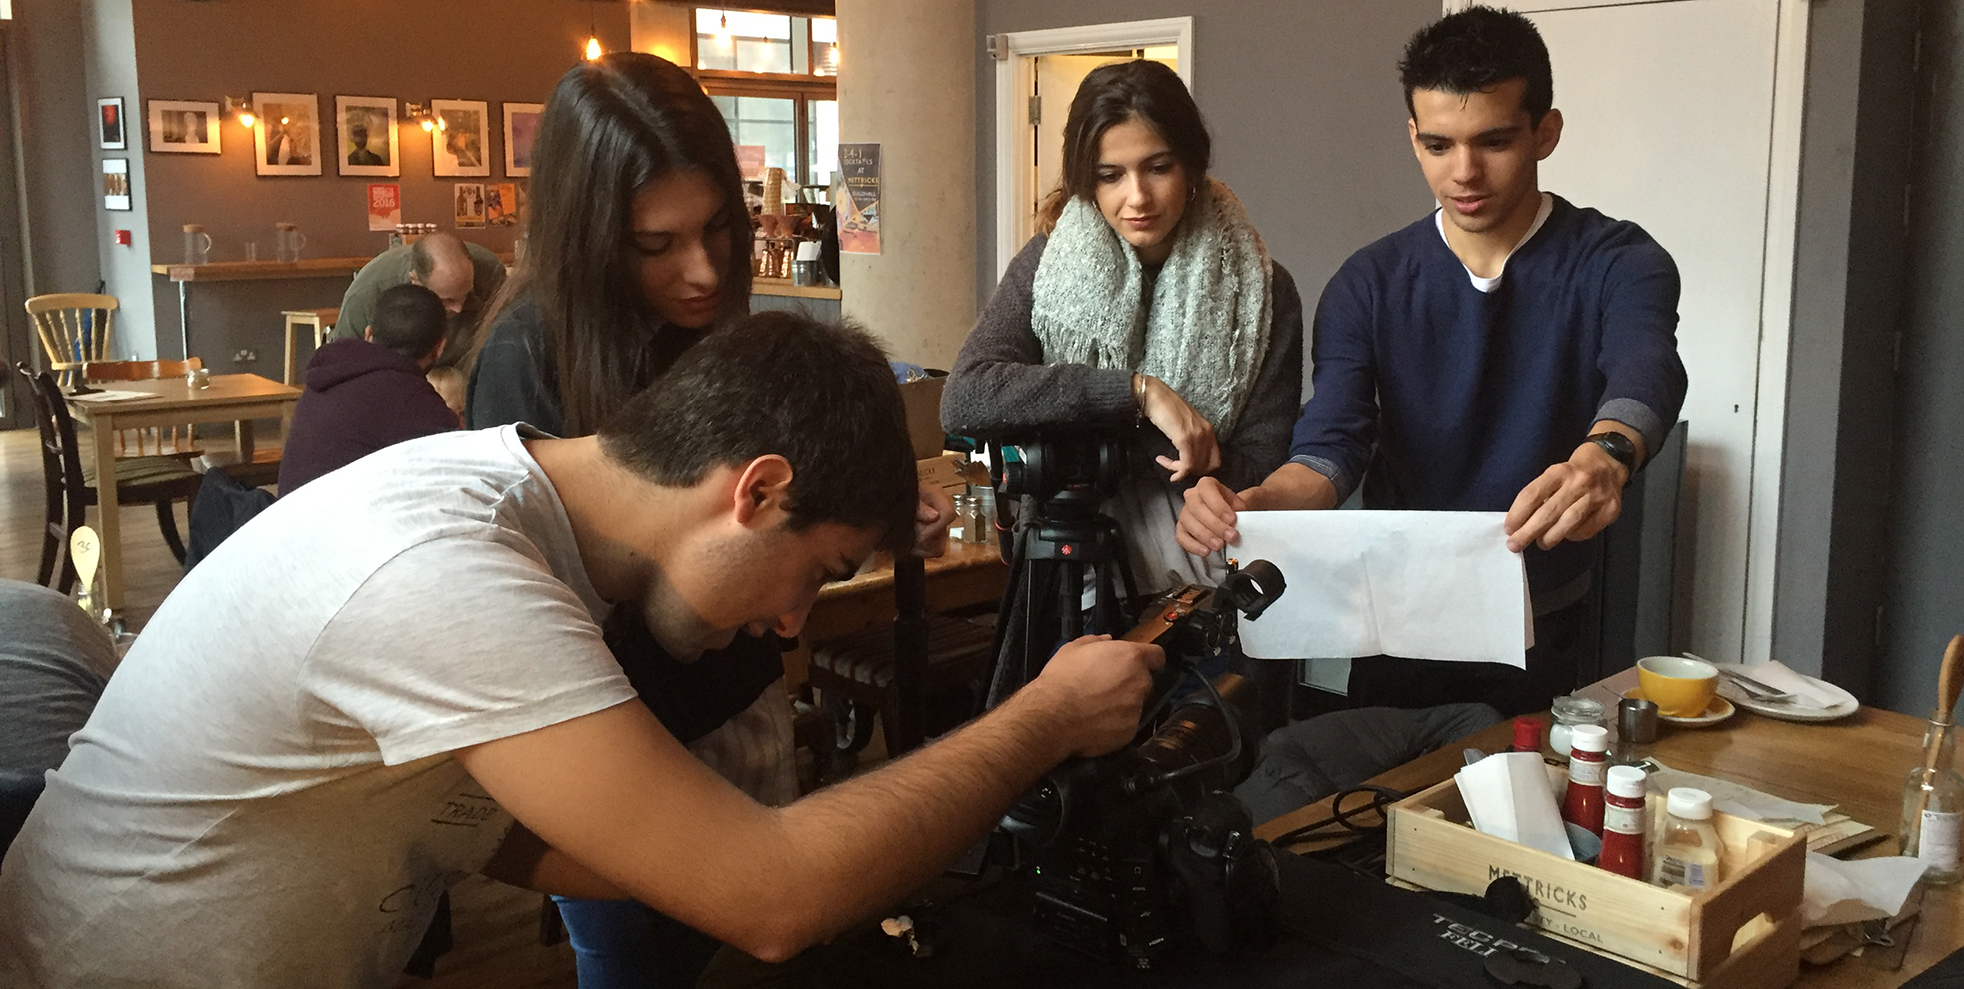 Students filming in a coffee shop